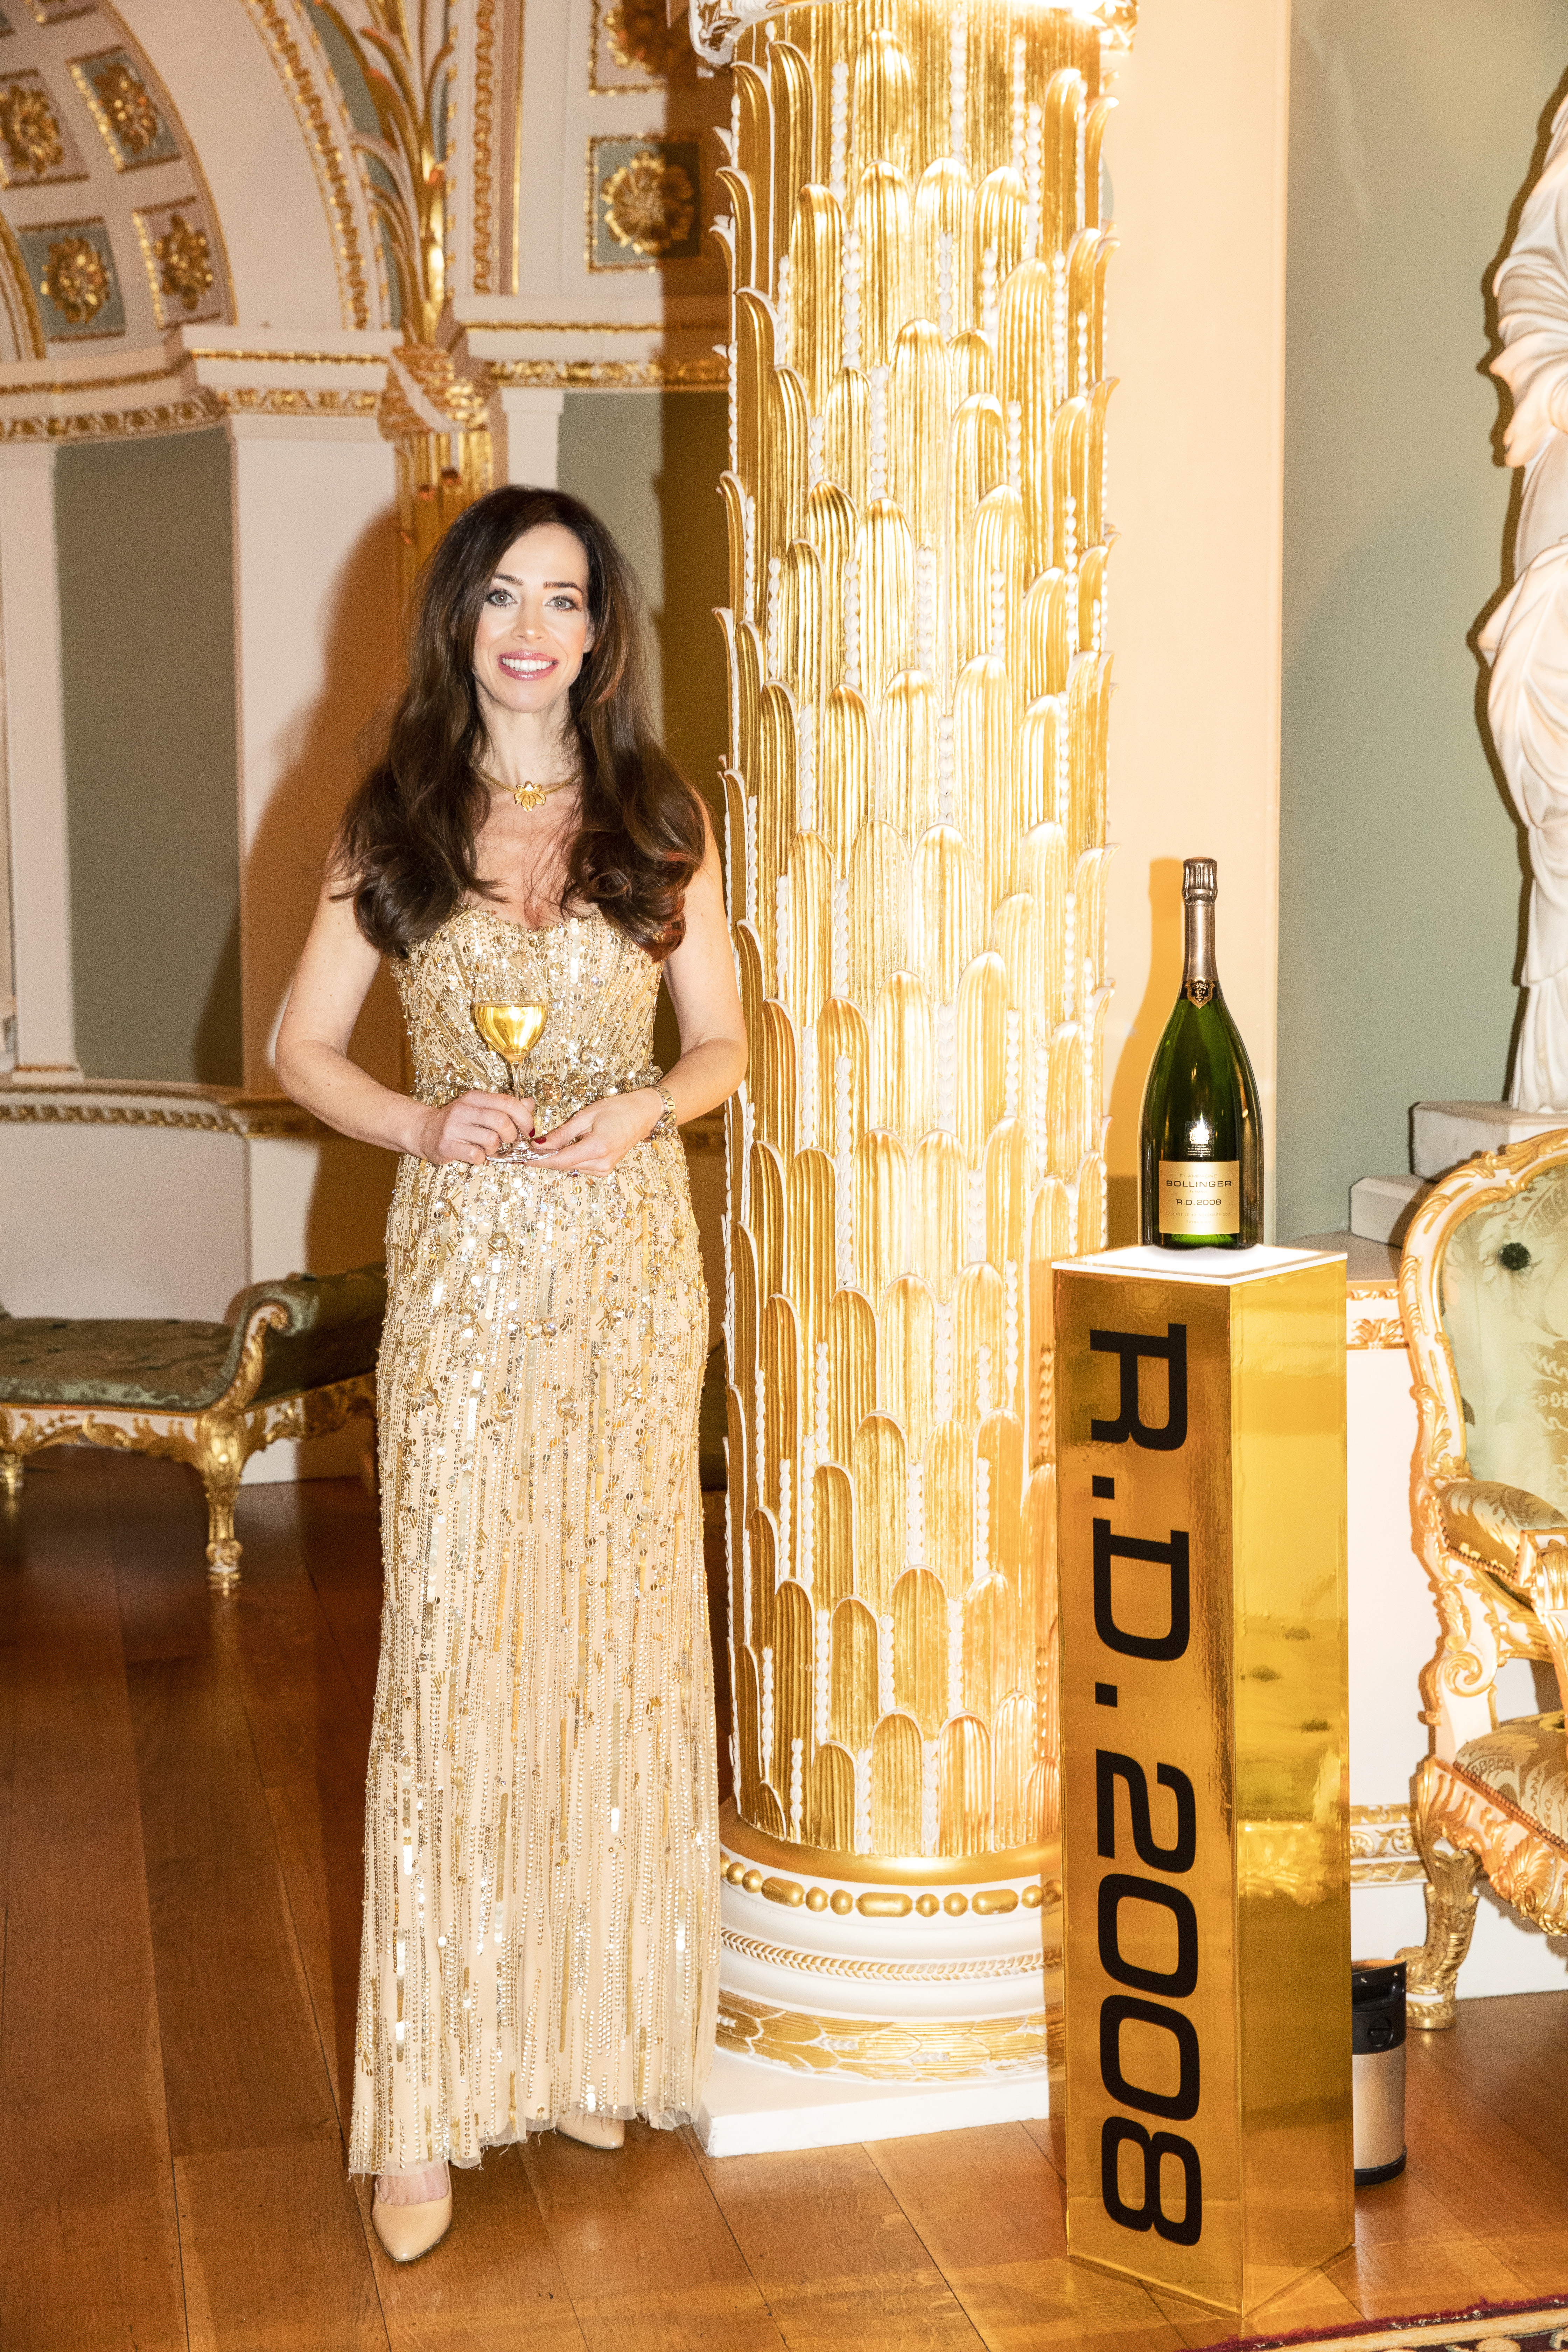 Host Victoria Carfantan, Director Champagne Bollinger  launches Bollinger RD 2008